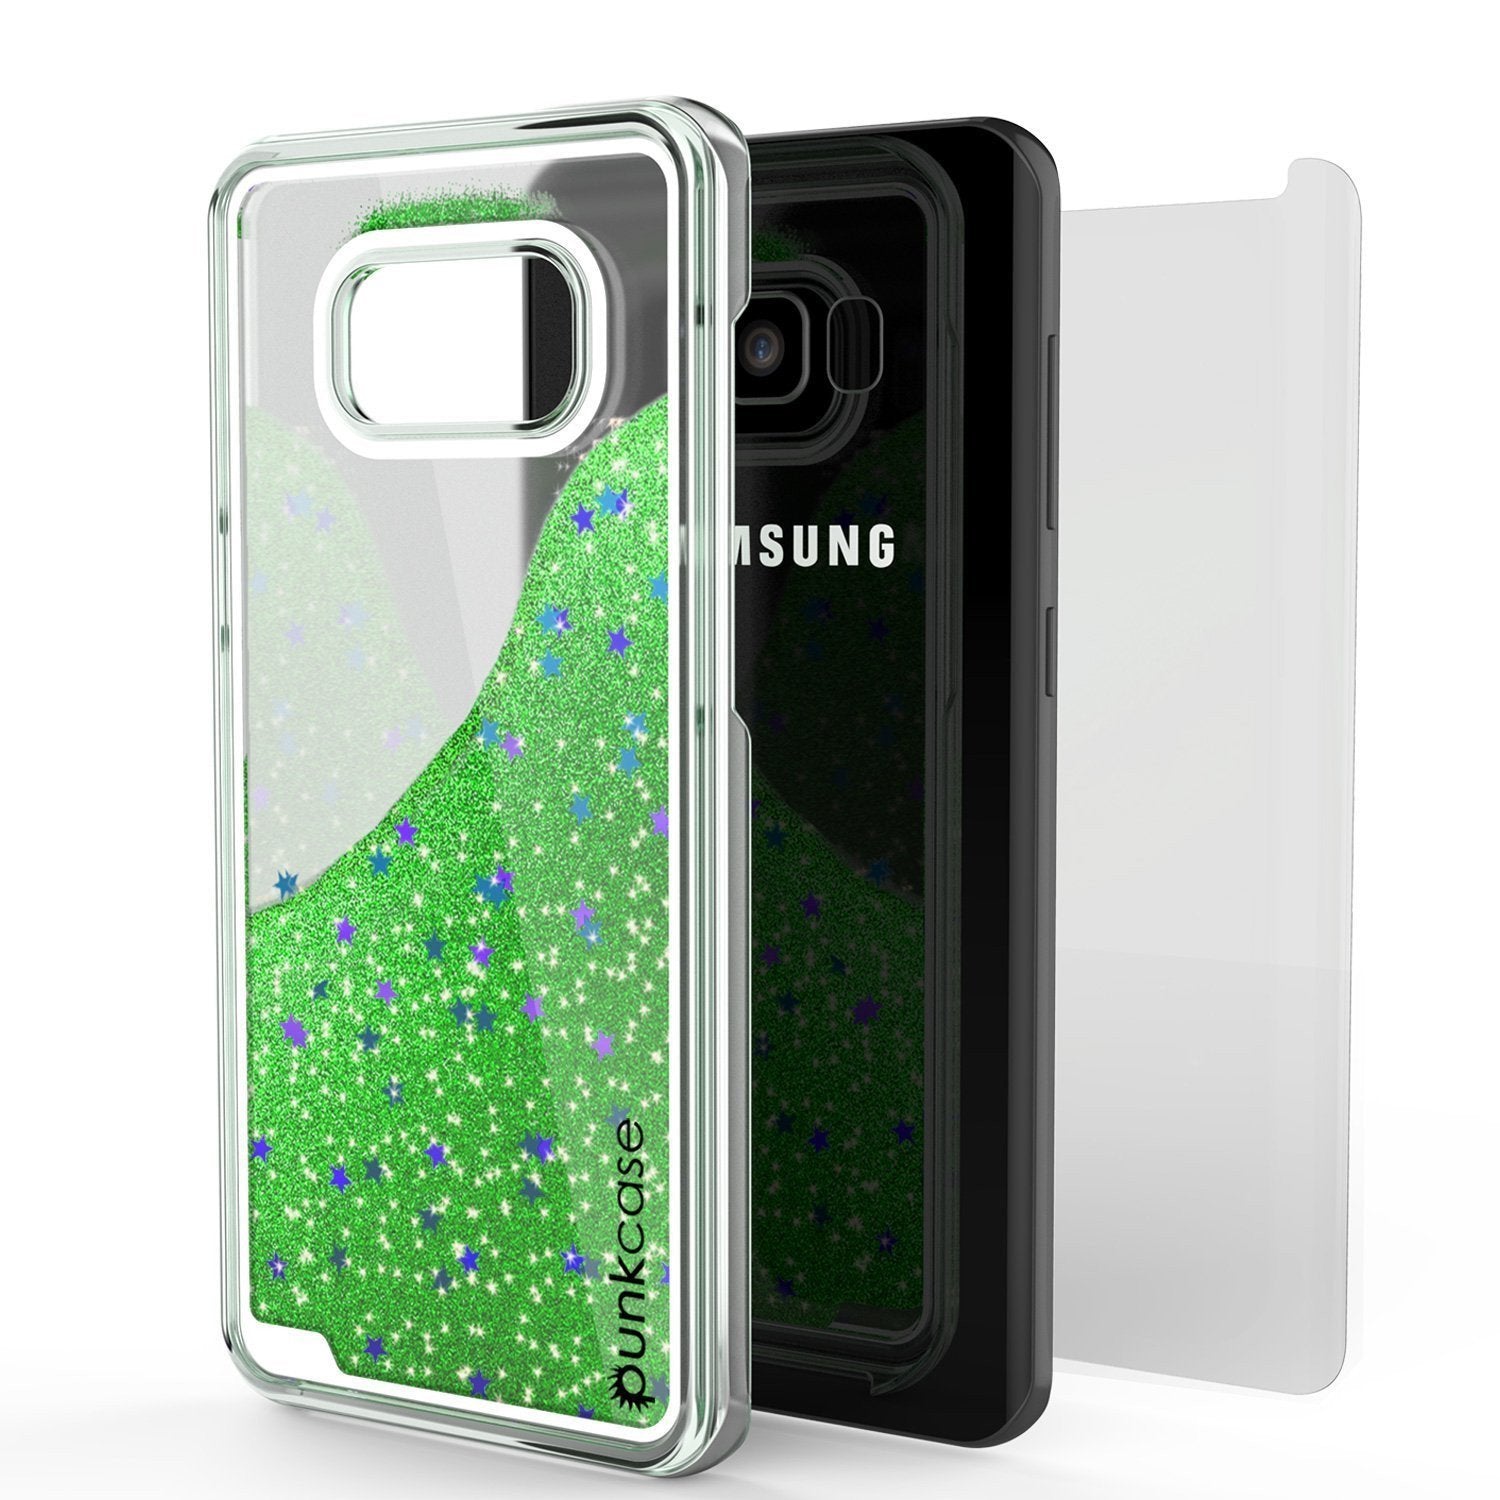 Galaxy S8 Case, Punkcase [Liquid Series] Protective Dual Layer Floating Glitter Cover with lots of Bling & Sparkle + PunkShield Screen Protector for Samsung S8 [Green]﻿ - PunkCase NZ